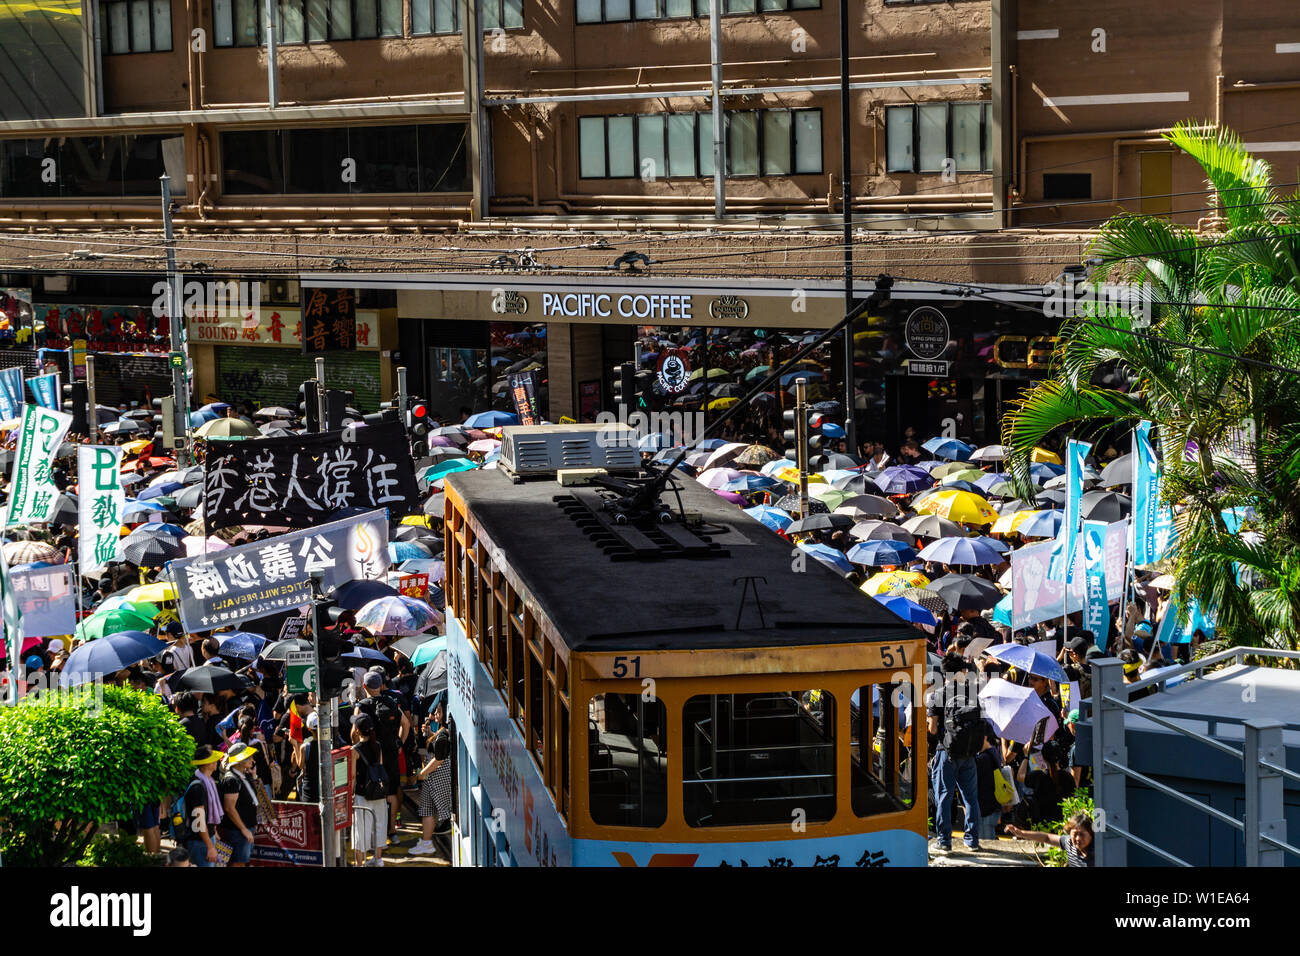 Hong Kong 2019 anti-extradition march on July 1st, protesters carry umbrellas to protect themselves against the hot sun Stock Photo